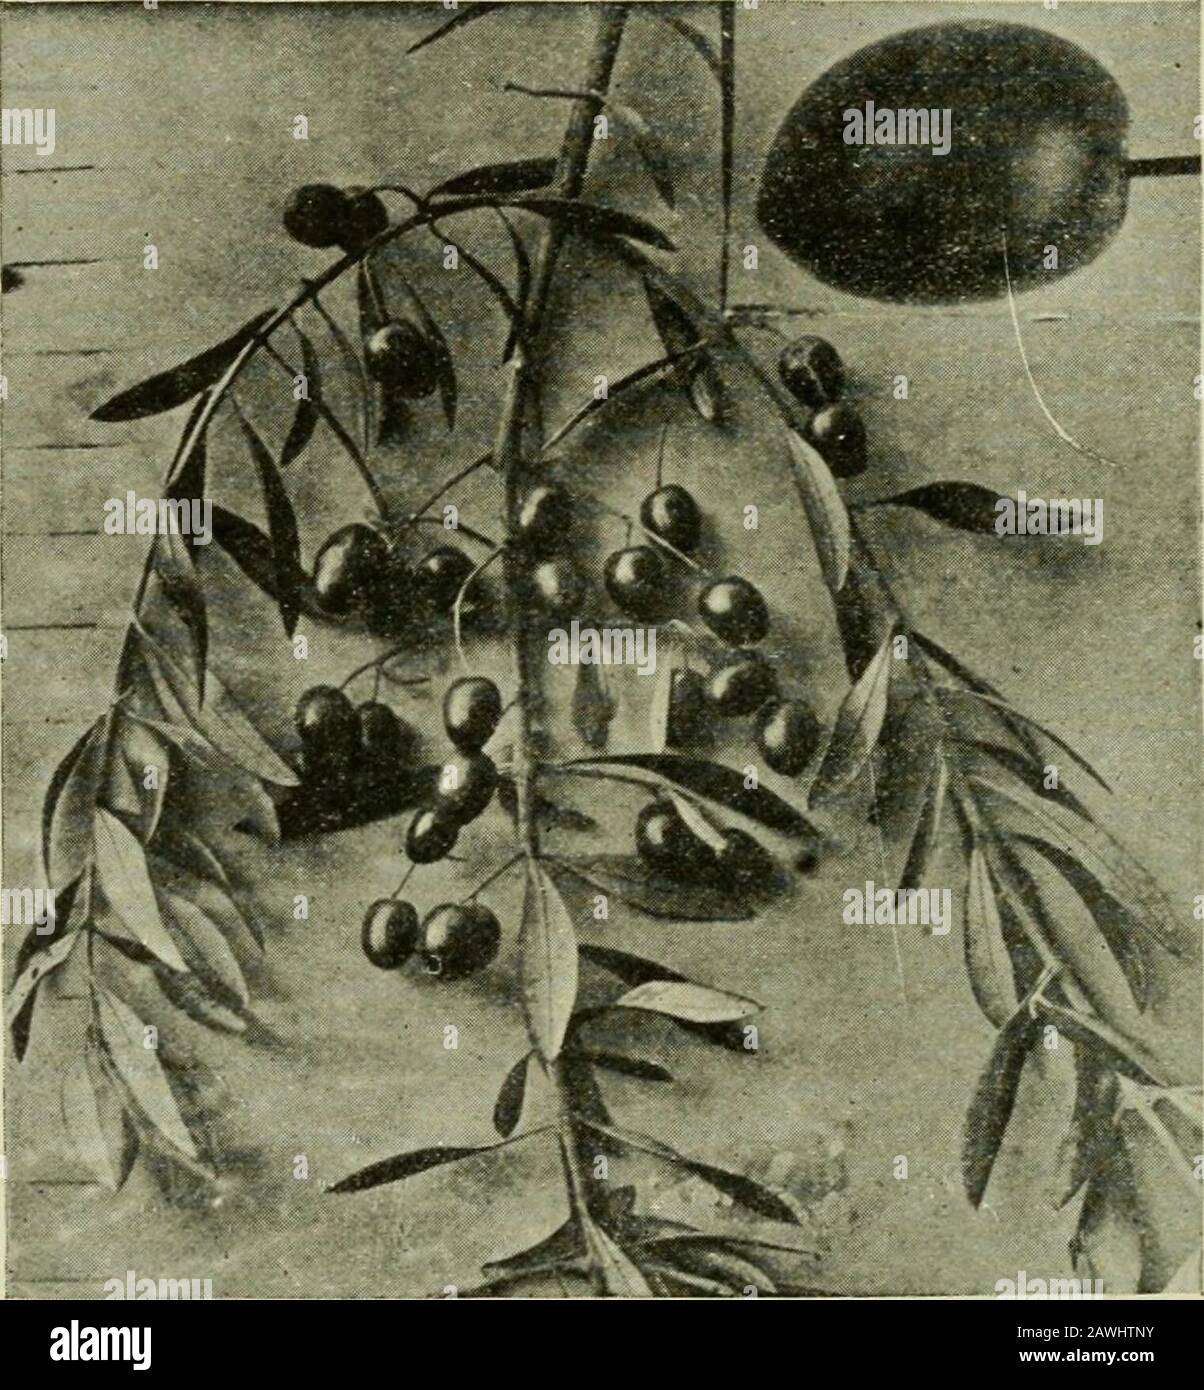 The California fruits and how to grow them; a manual of methods which have yielded greatest success, with the lists of varieties best adapted to the different districts of the state . ion variety; is of a jet black whenripe. This tree begins to fruit quite young, and is a prolific bearer. Very hardyand prolific even in dry situations. Atroviolacea.—Medium size, black, chiefly valuable for oil. Uvaria.—Imported by John Rock from France. Oval, regular, and roundedon both ends; pit straight, heavy, late; later than the common Mission olive; 418 CALIFORNIA FRUITS : HOW TO GROW THEM color dark purp Stock Photo